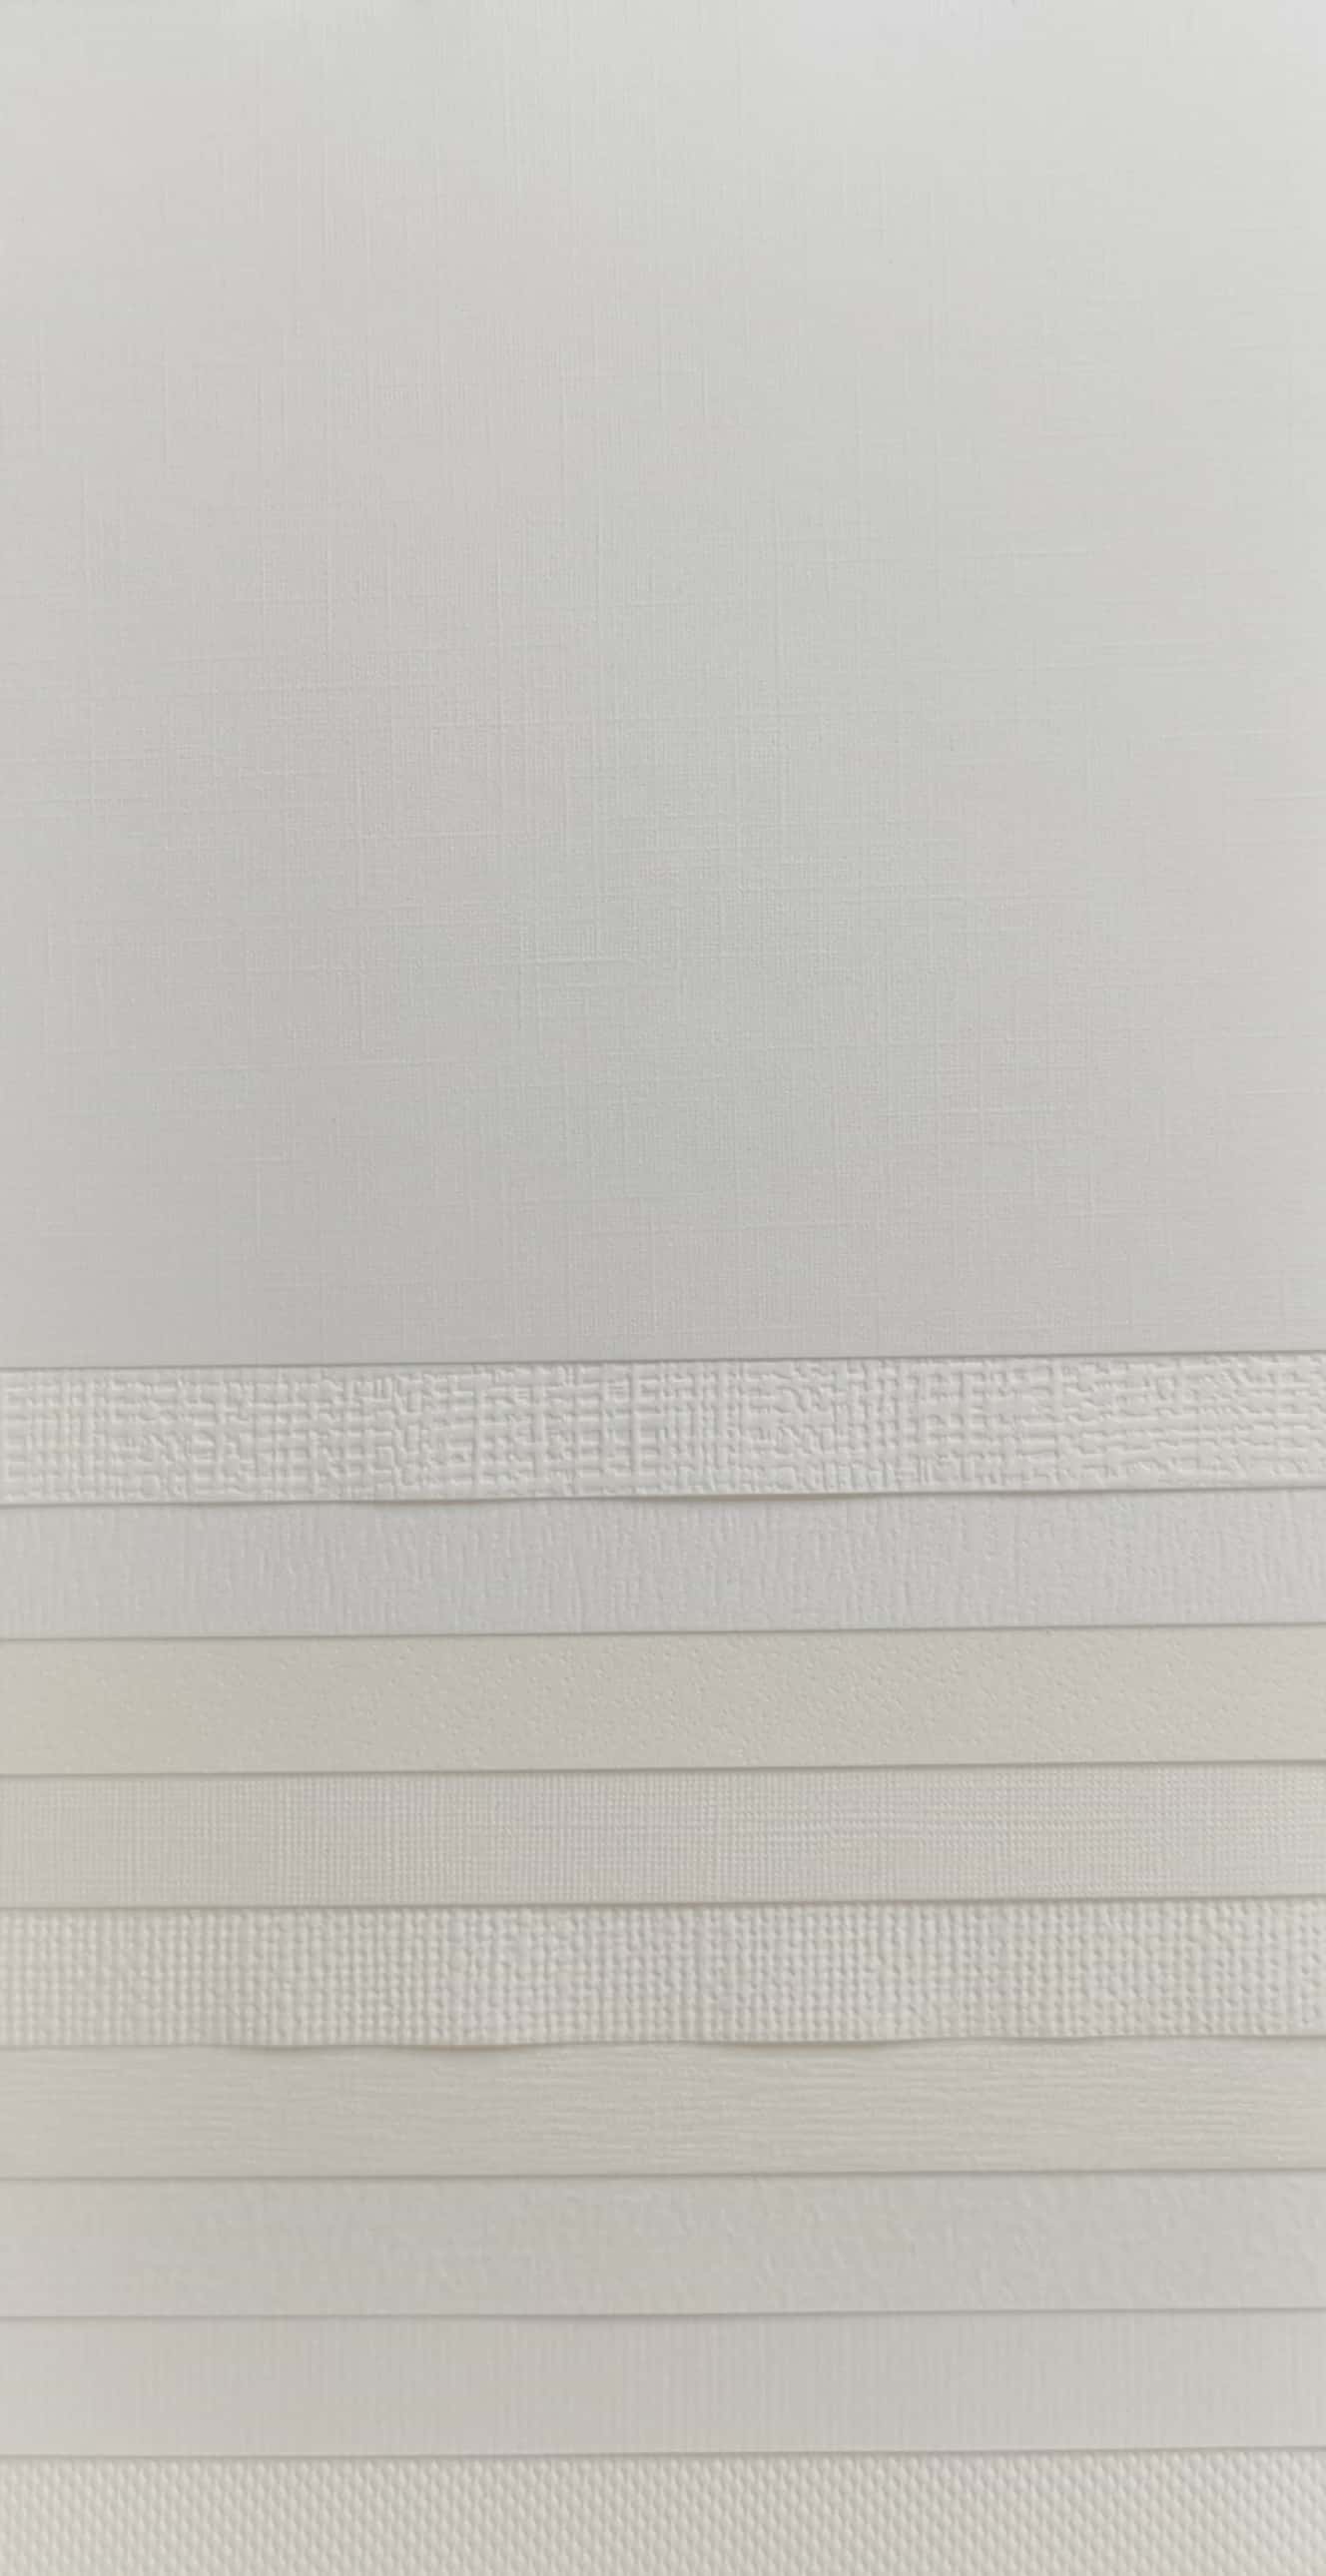 rigid box with fine patterned paper